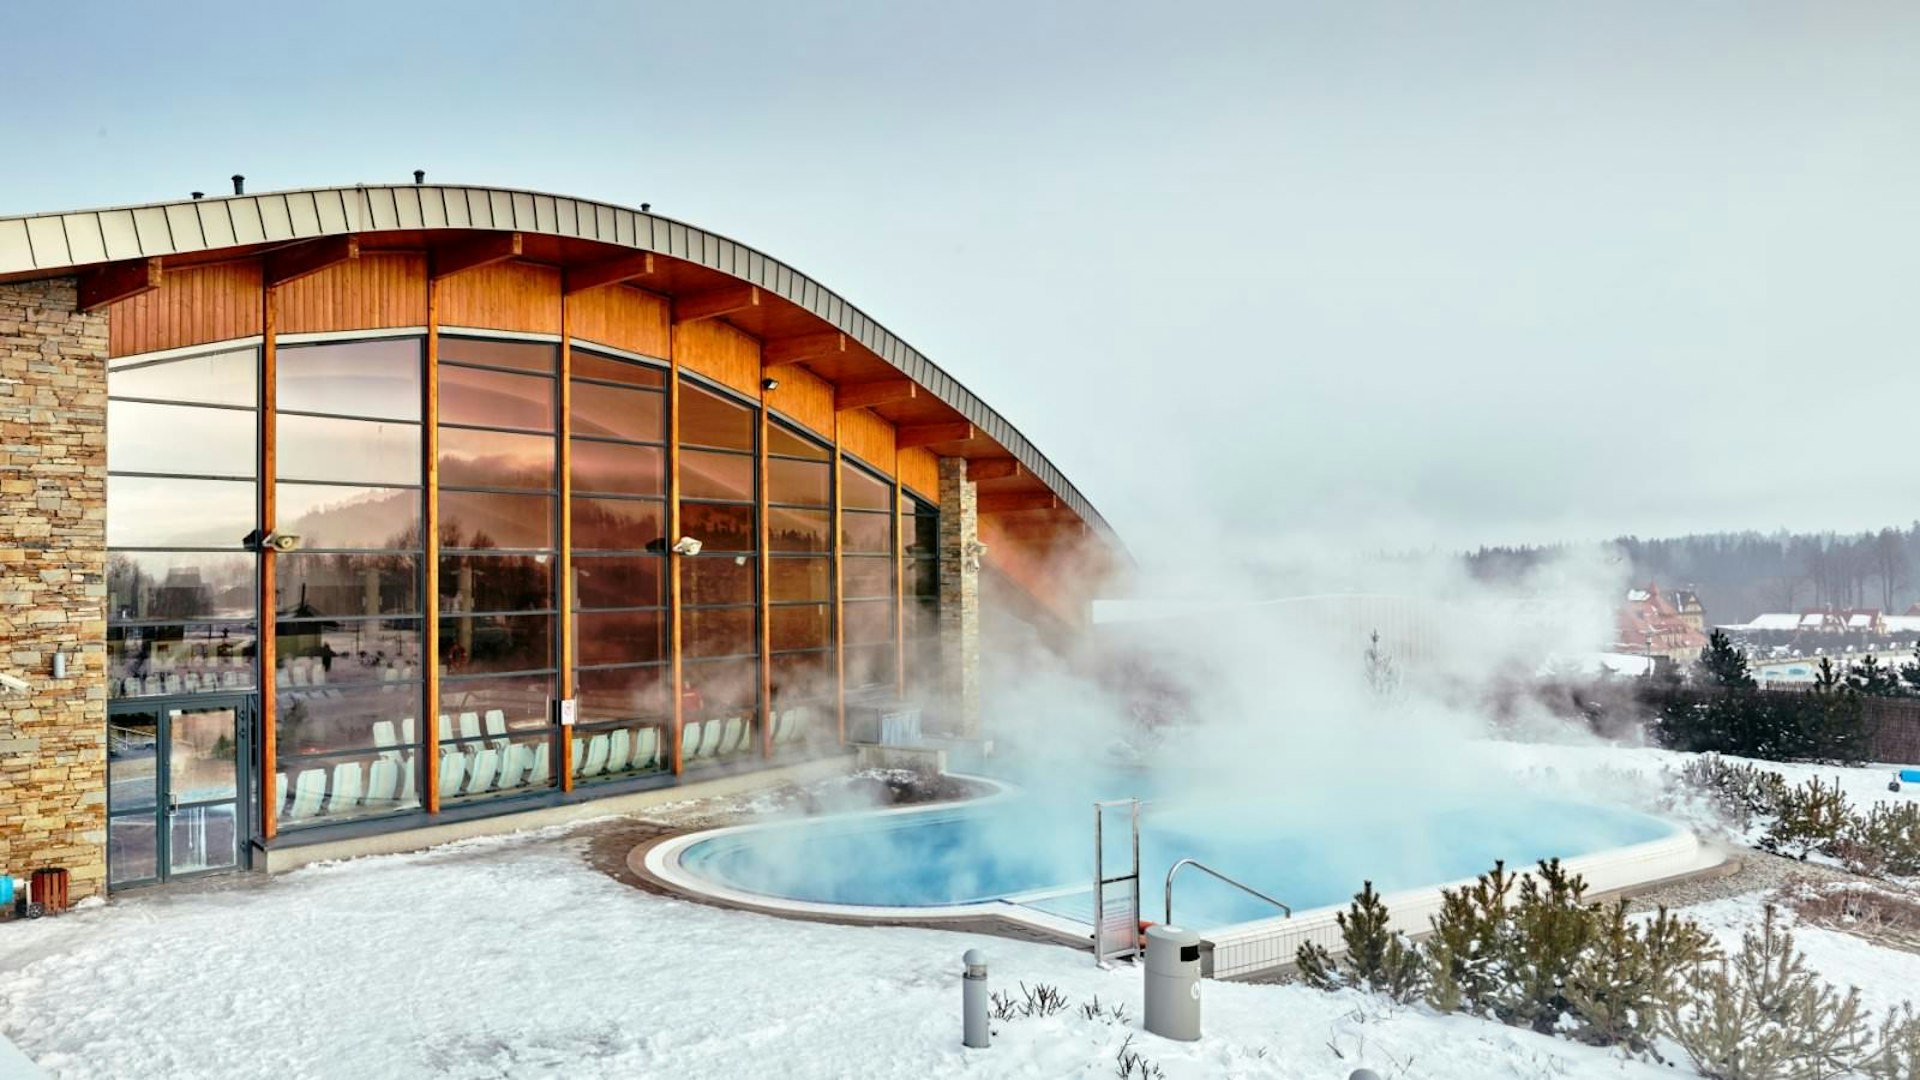 Terma Bania's outdoor thermal pool steaming while surrounded by snow at dusk